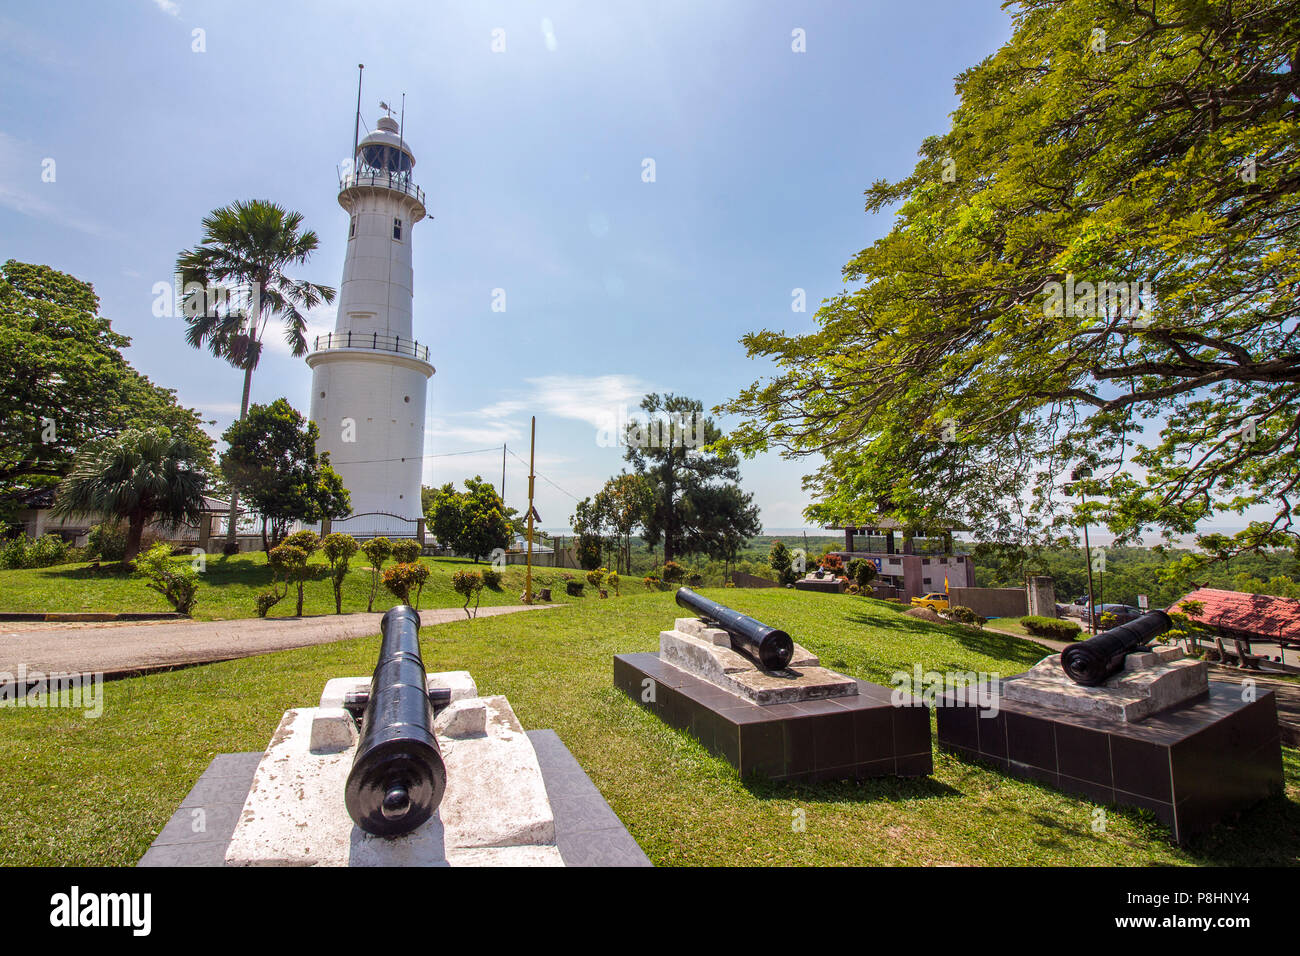 Altingsburg Lighthouse located at Melawati Hill, Kuala Selangor, Malaysia, it was built in 1907 and used extensively during the British colonial perio Stock Photo